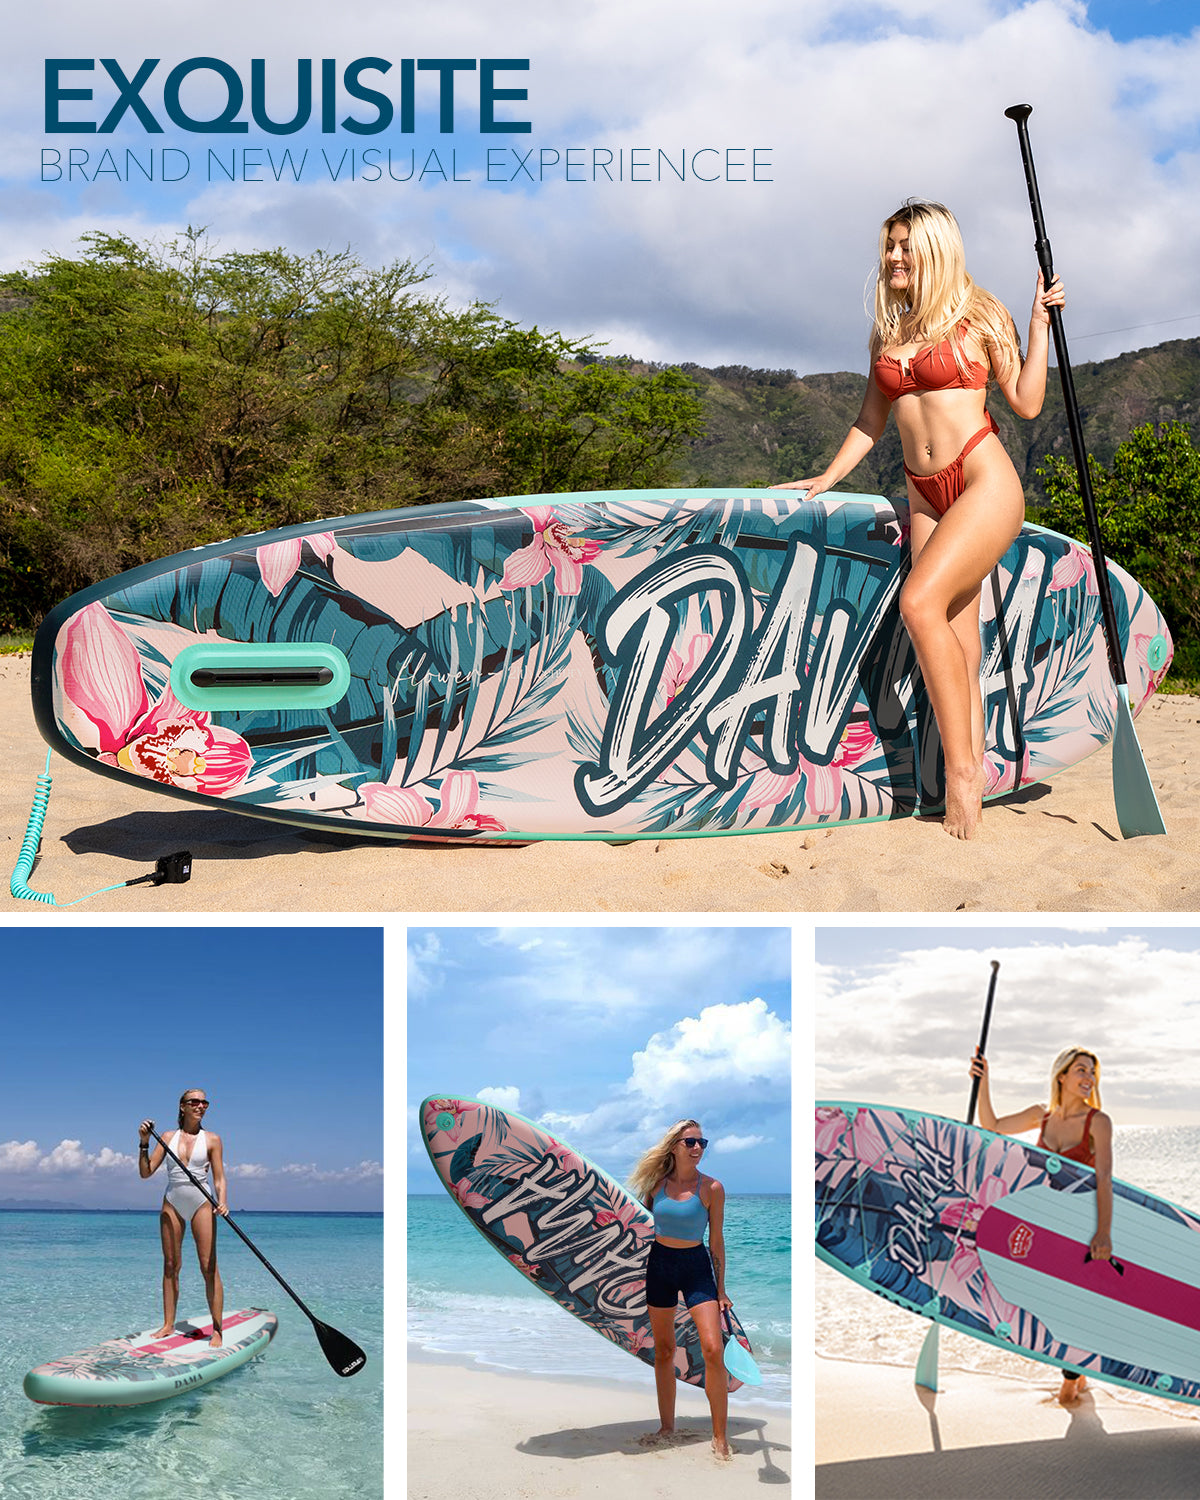 DAMA Stand Up Paddle Boards 10'6"*32"*6" Drop Stitch Inflatable Board Sup Boards Classic Flower W/Camera Mount, Pump, for Surfing, Travling, Yoga